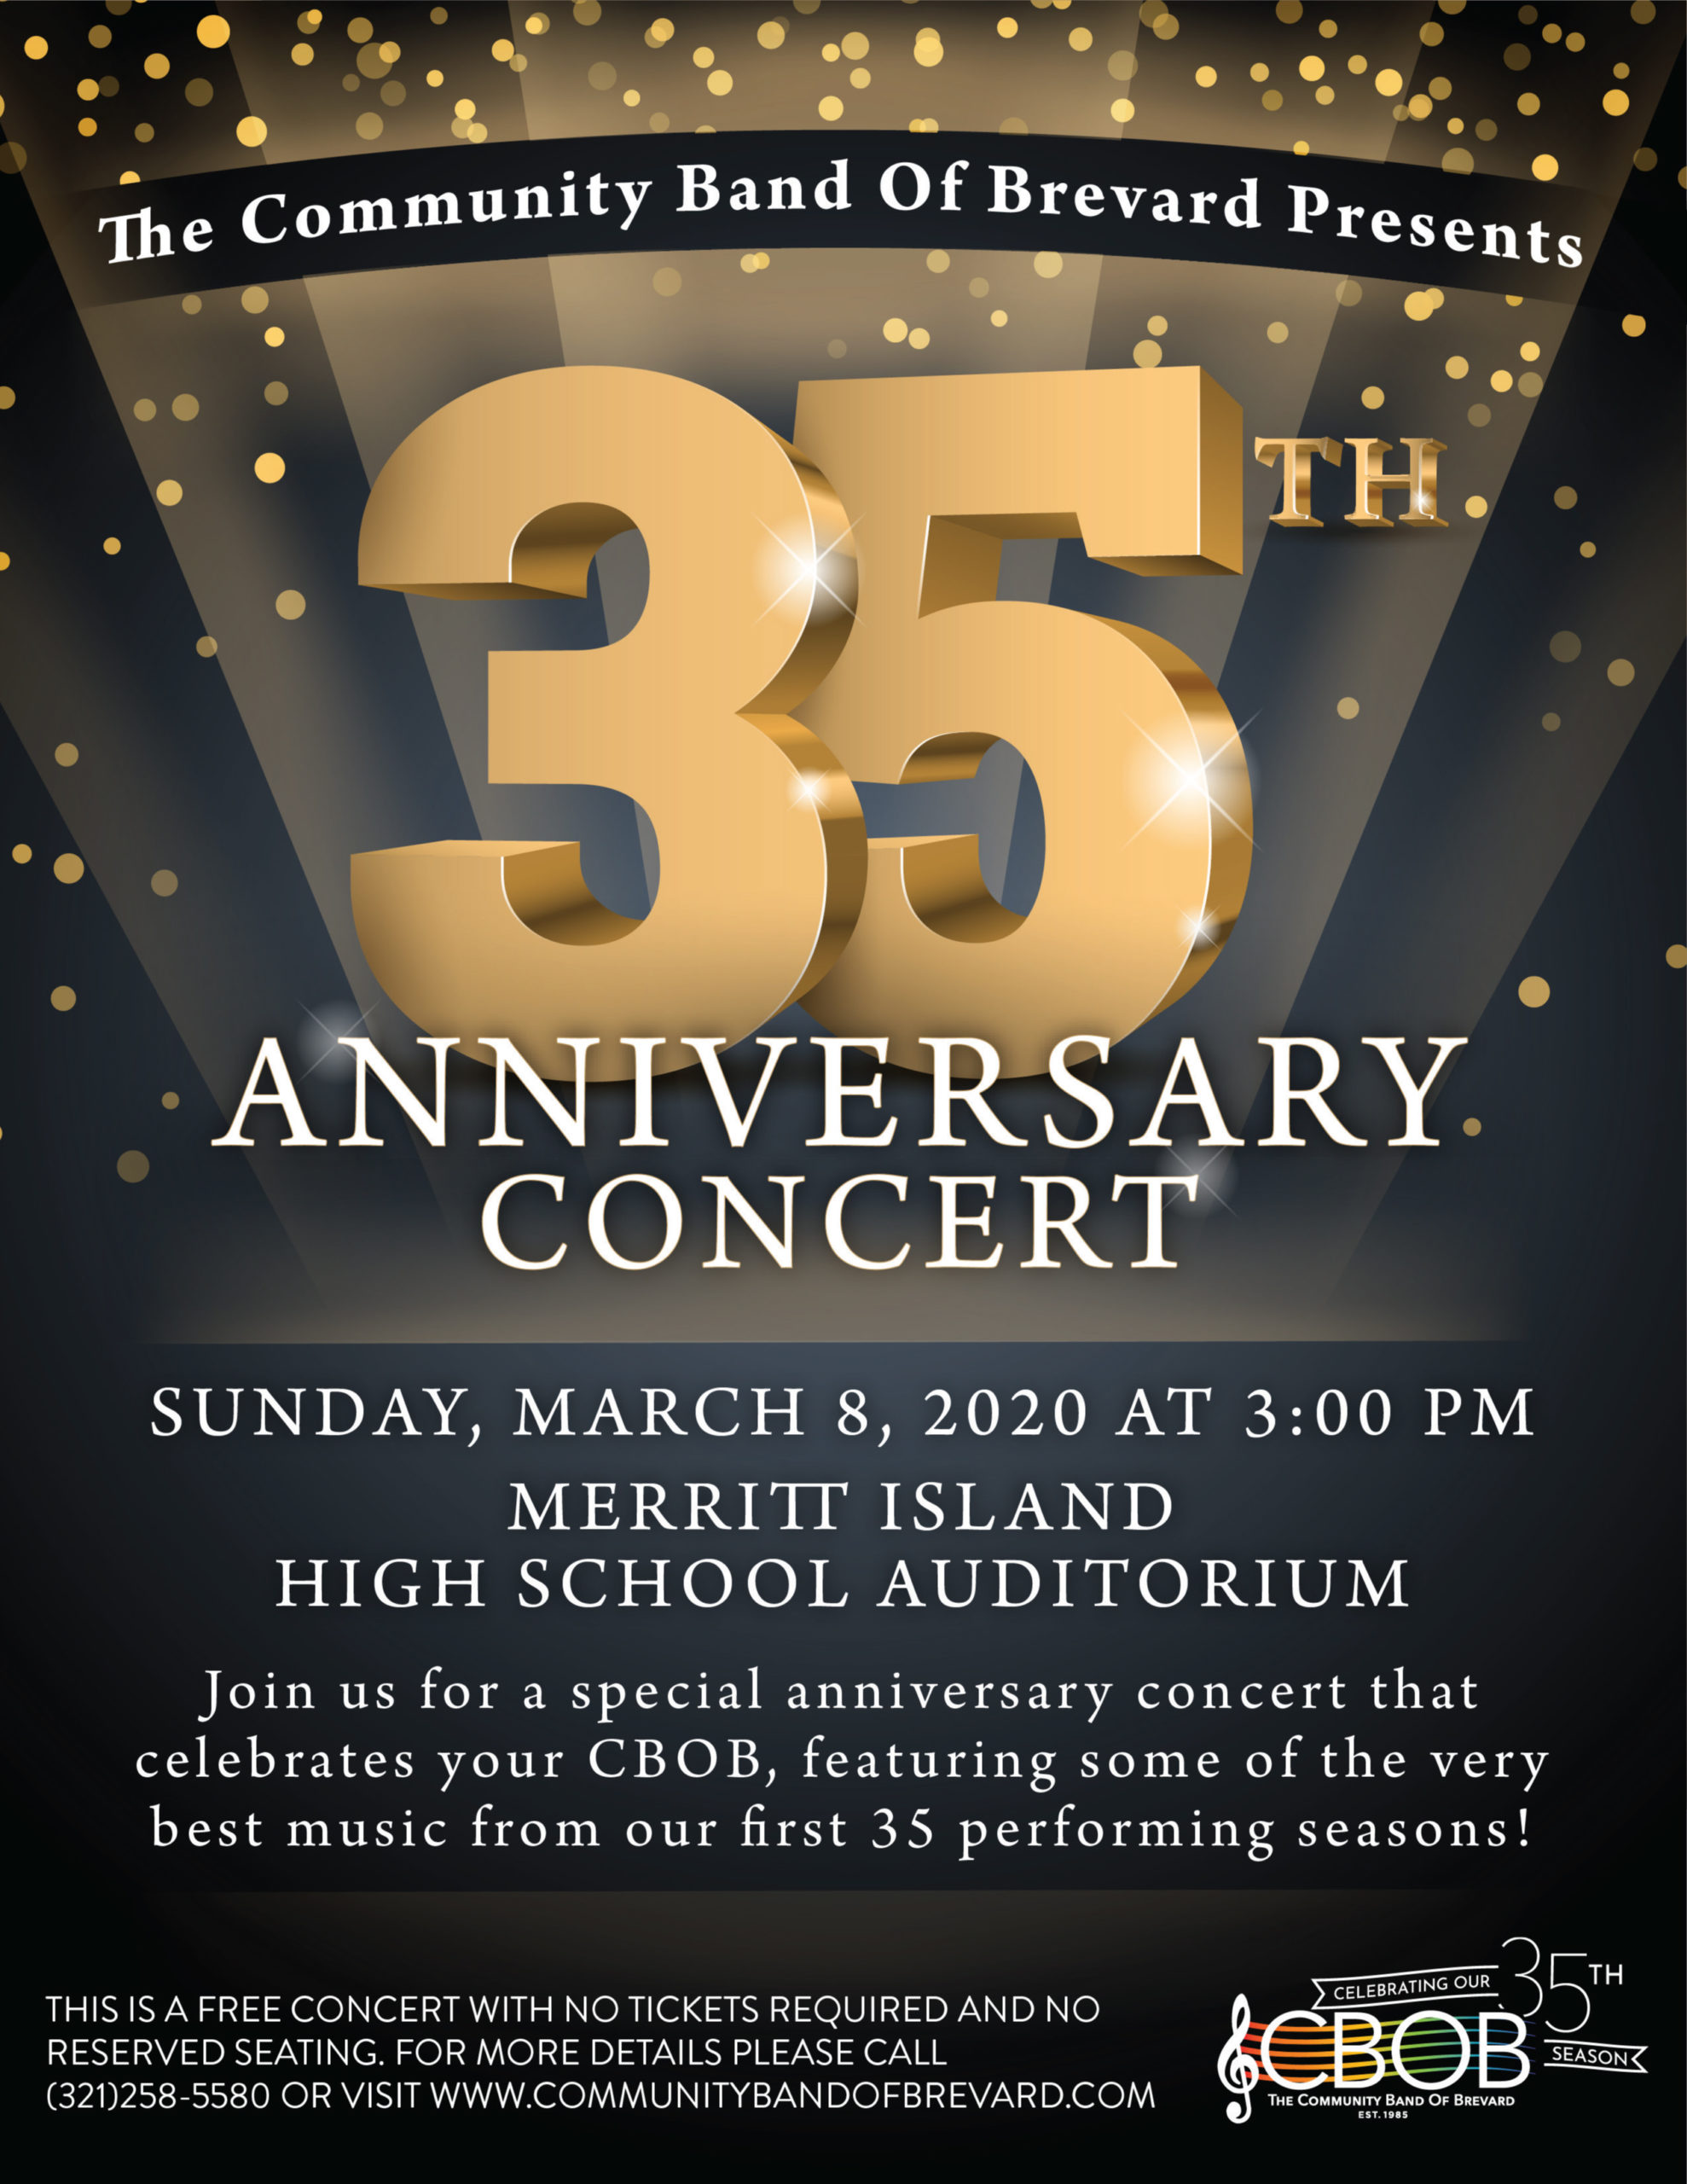 Band is Playing Favorites During '35th Anniversary Concert' performed by Community Band of Brevard